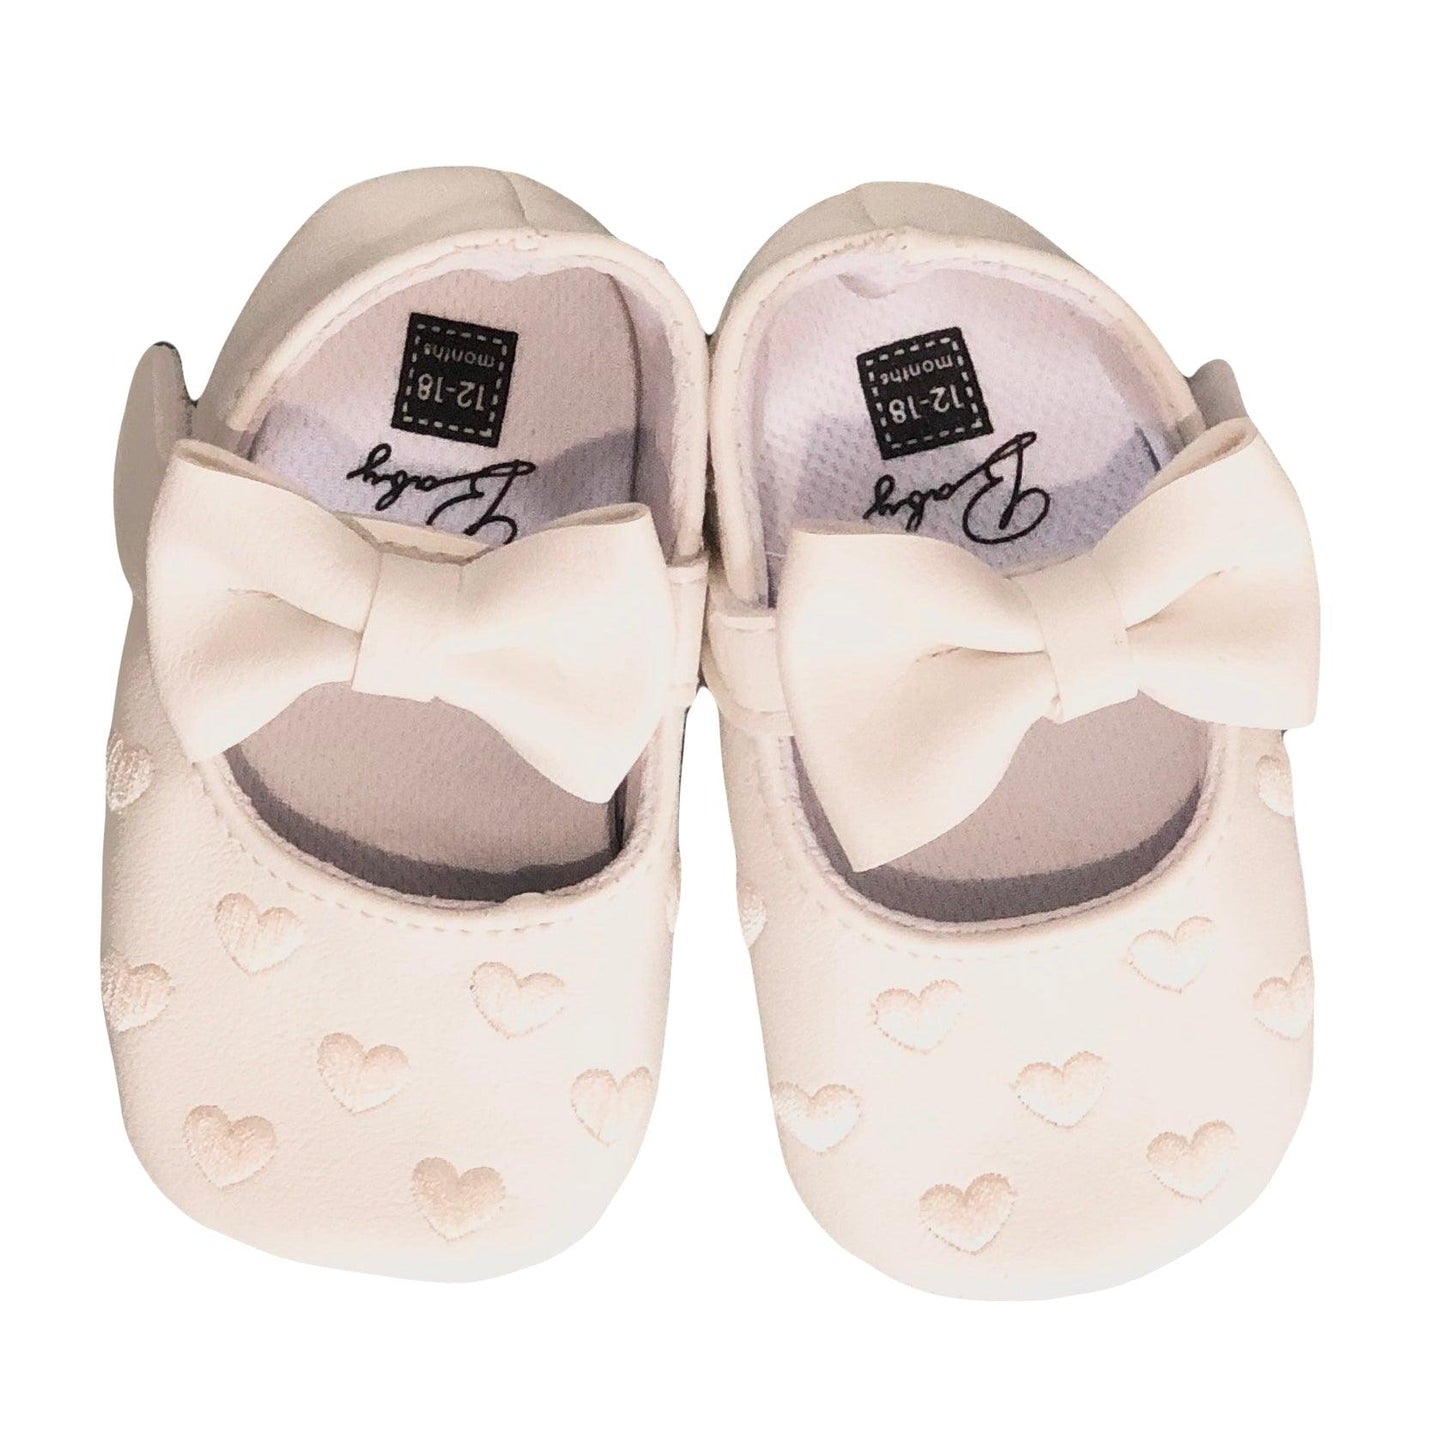 Heart Embroidered Pram Shoes | Oscar & Me | Baby & Children’s Clothing & Accessories